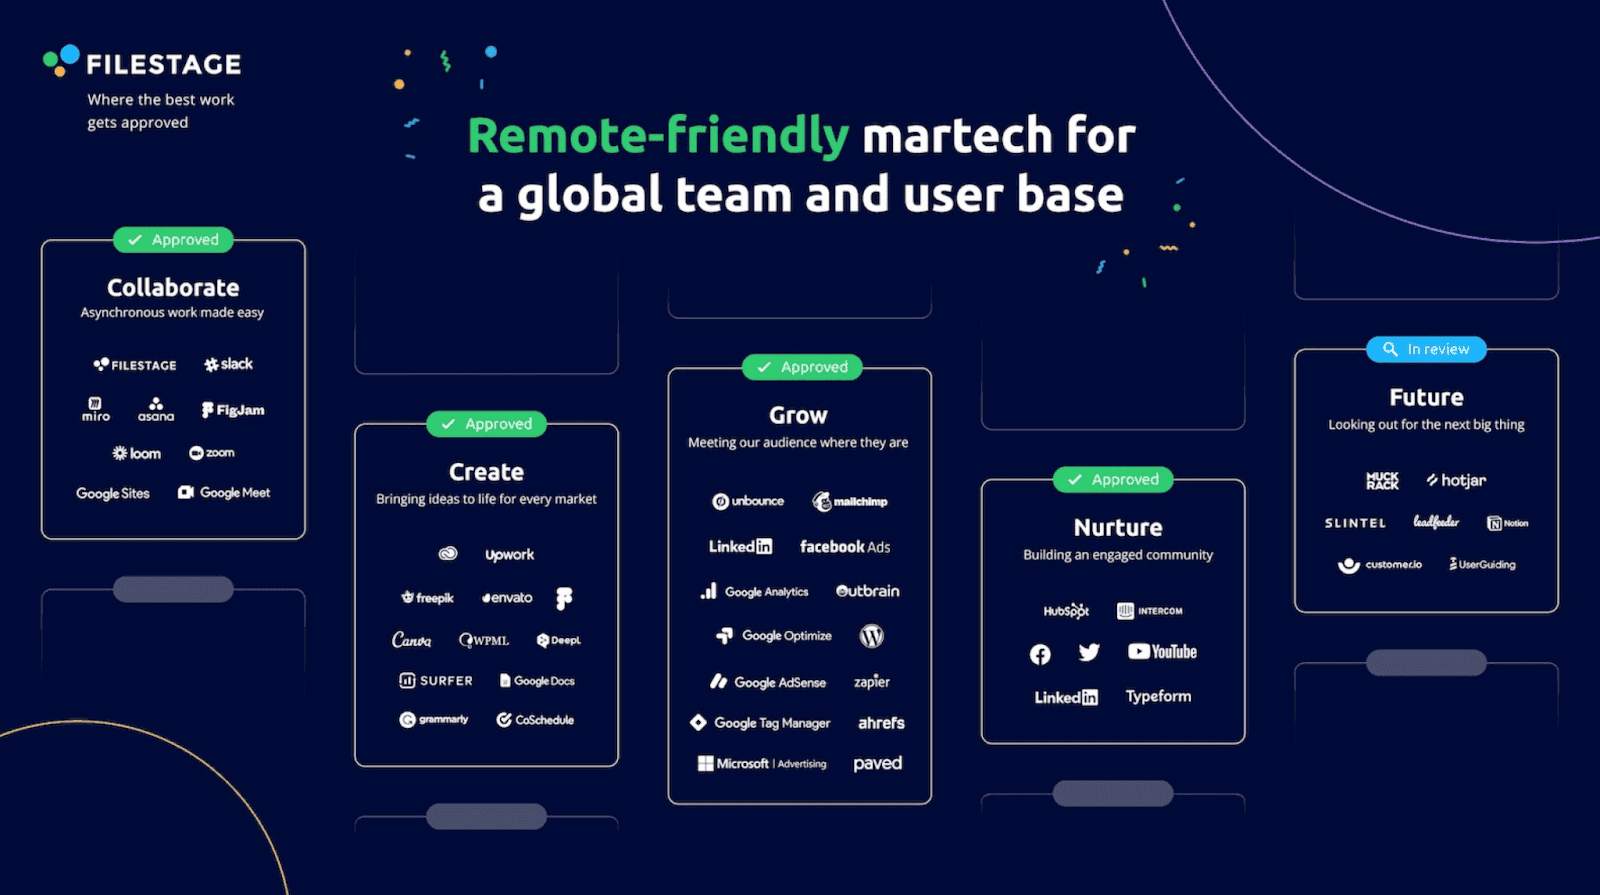 Filestage shows their remote friendly martech stack by using collaborate, create, grow, nurture, and future.